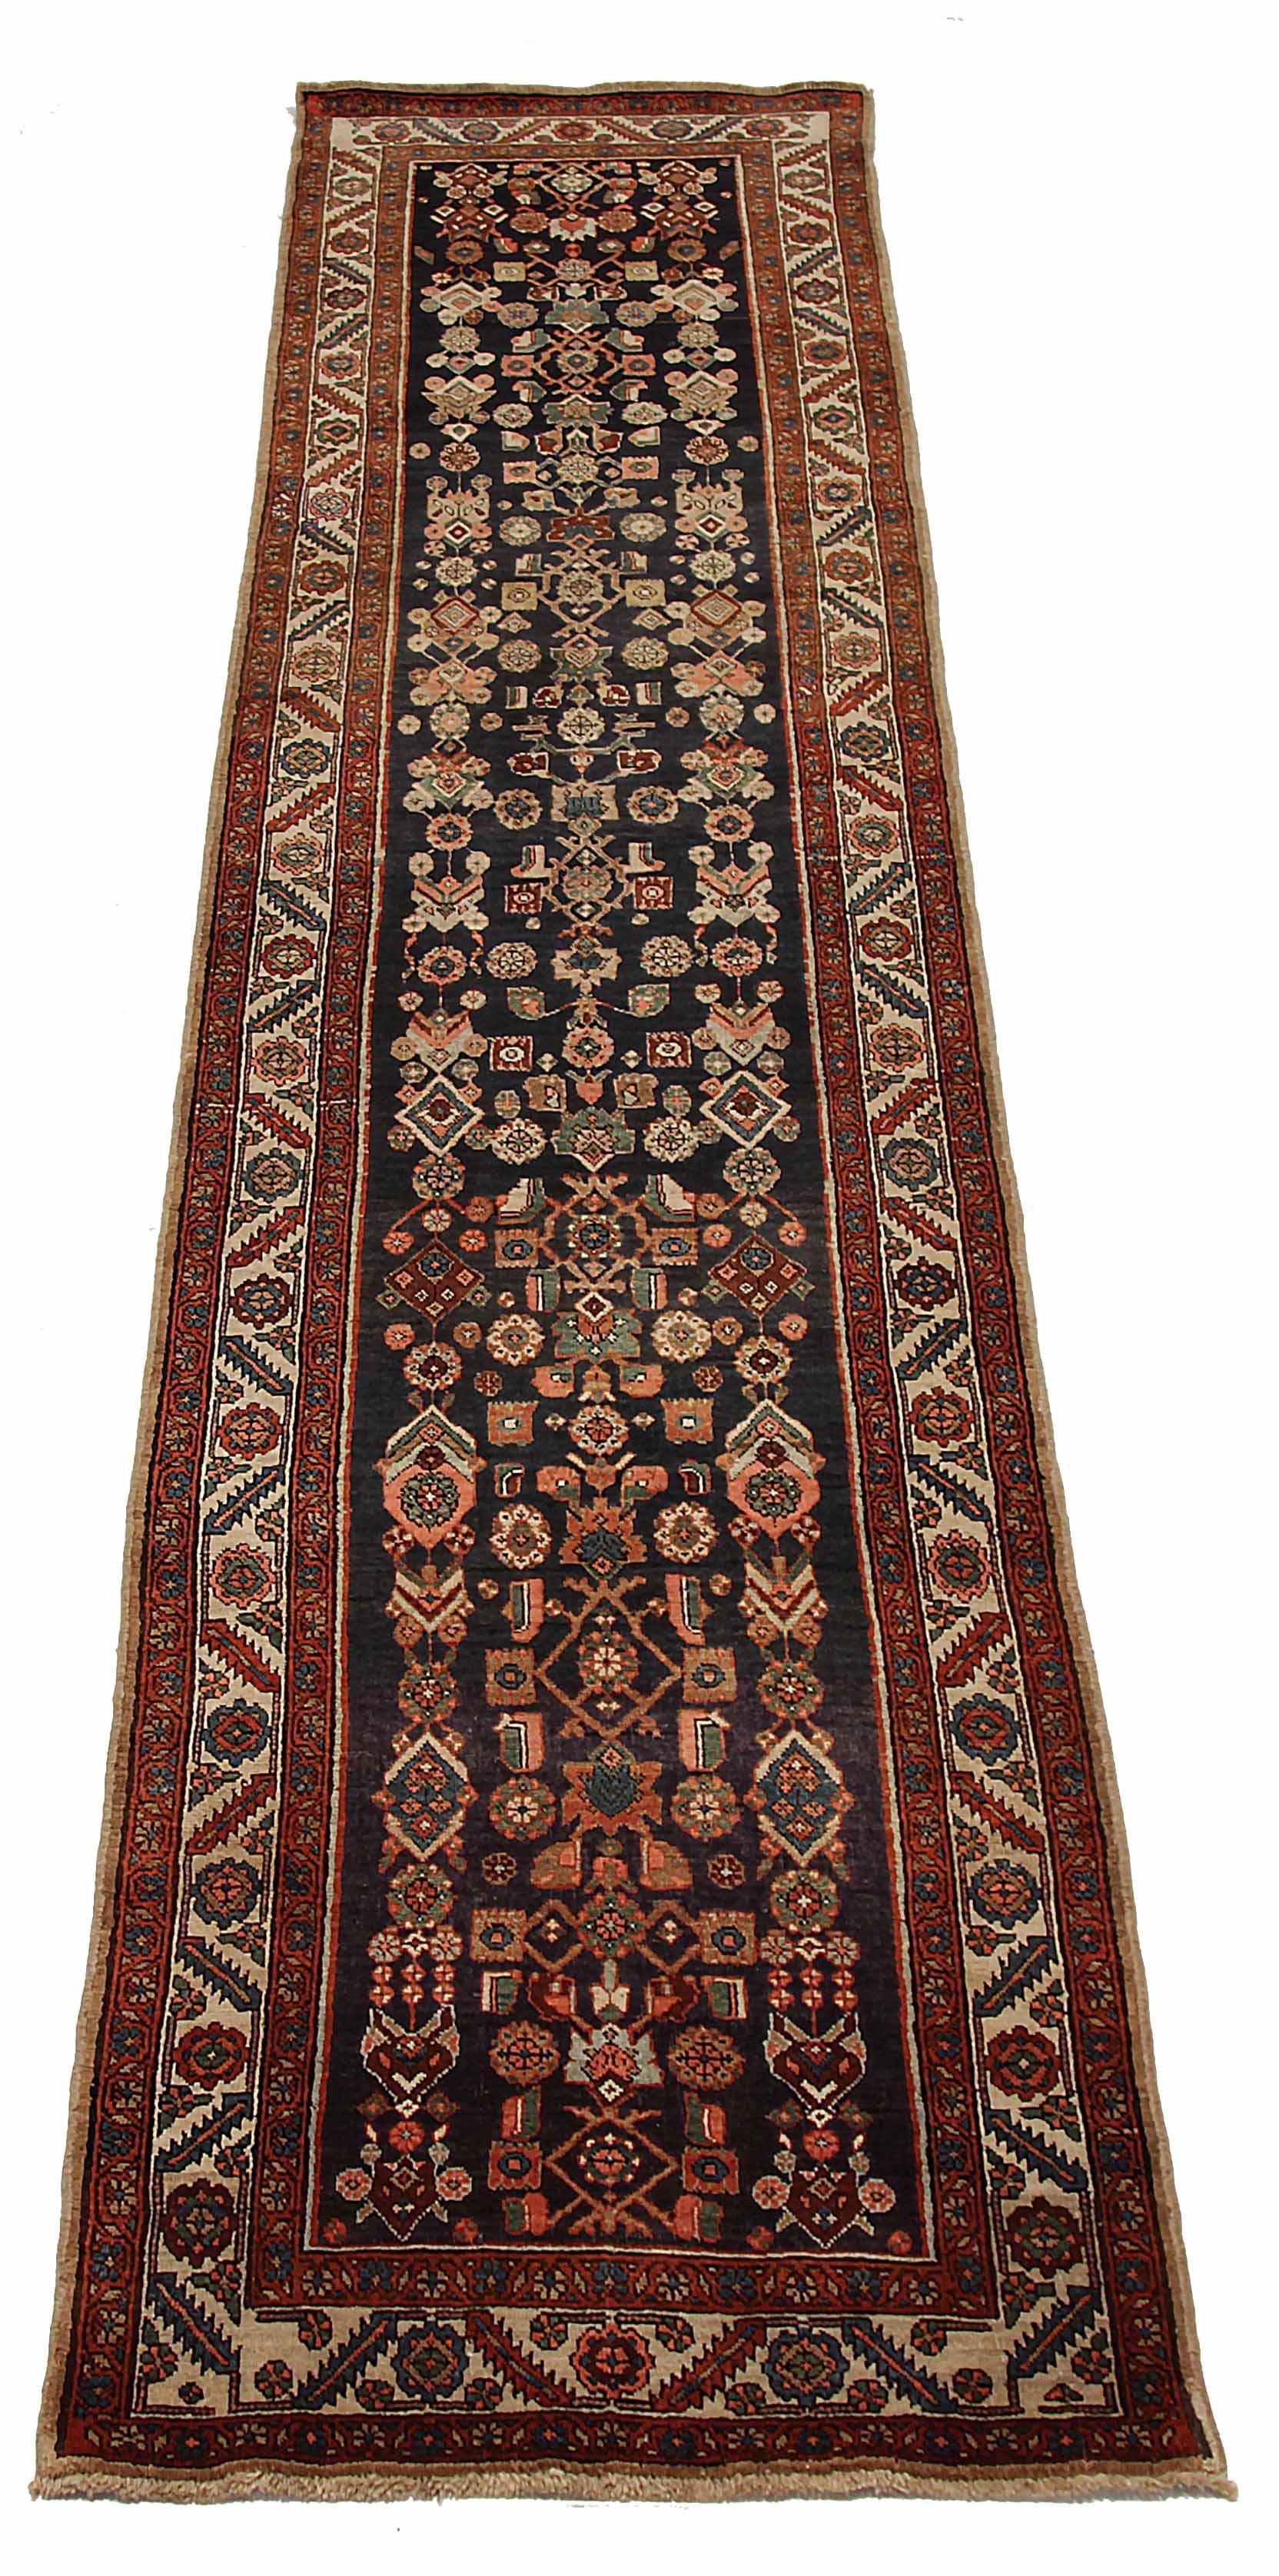 Antique runner rug handwoven from the finest sheep’s wool. It’s colored with all-natural vegetable dyes that are safe for humans and pets. It’s a traditional Azarbaijan design handwoven by expert artisans. It’s a lovely runner rug that can be